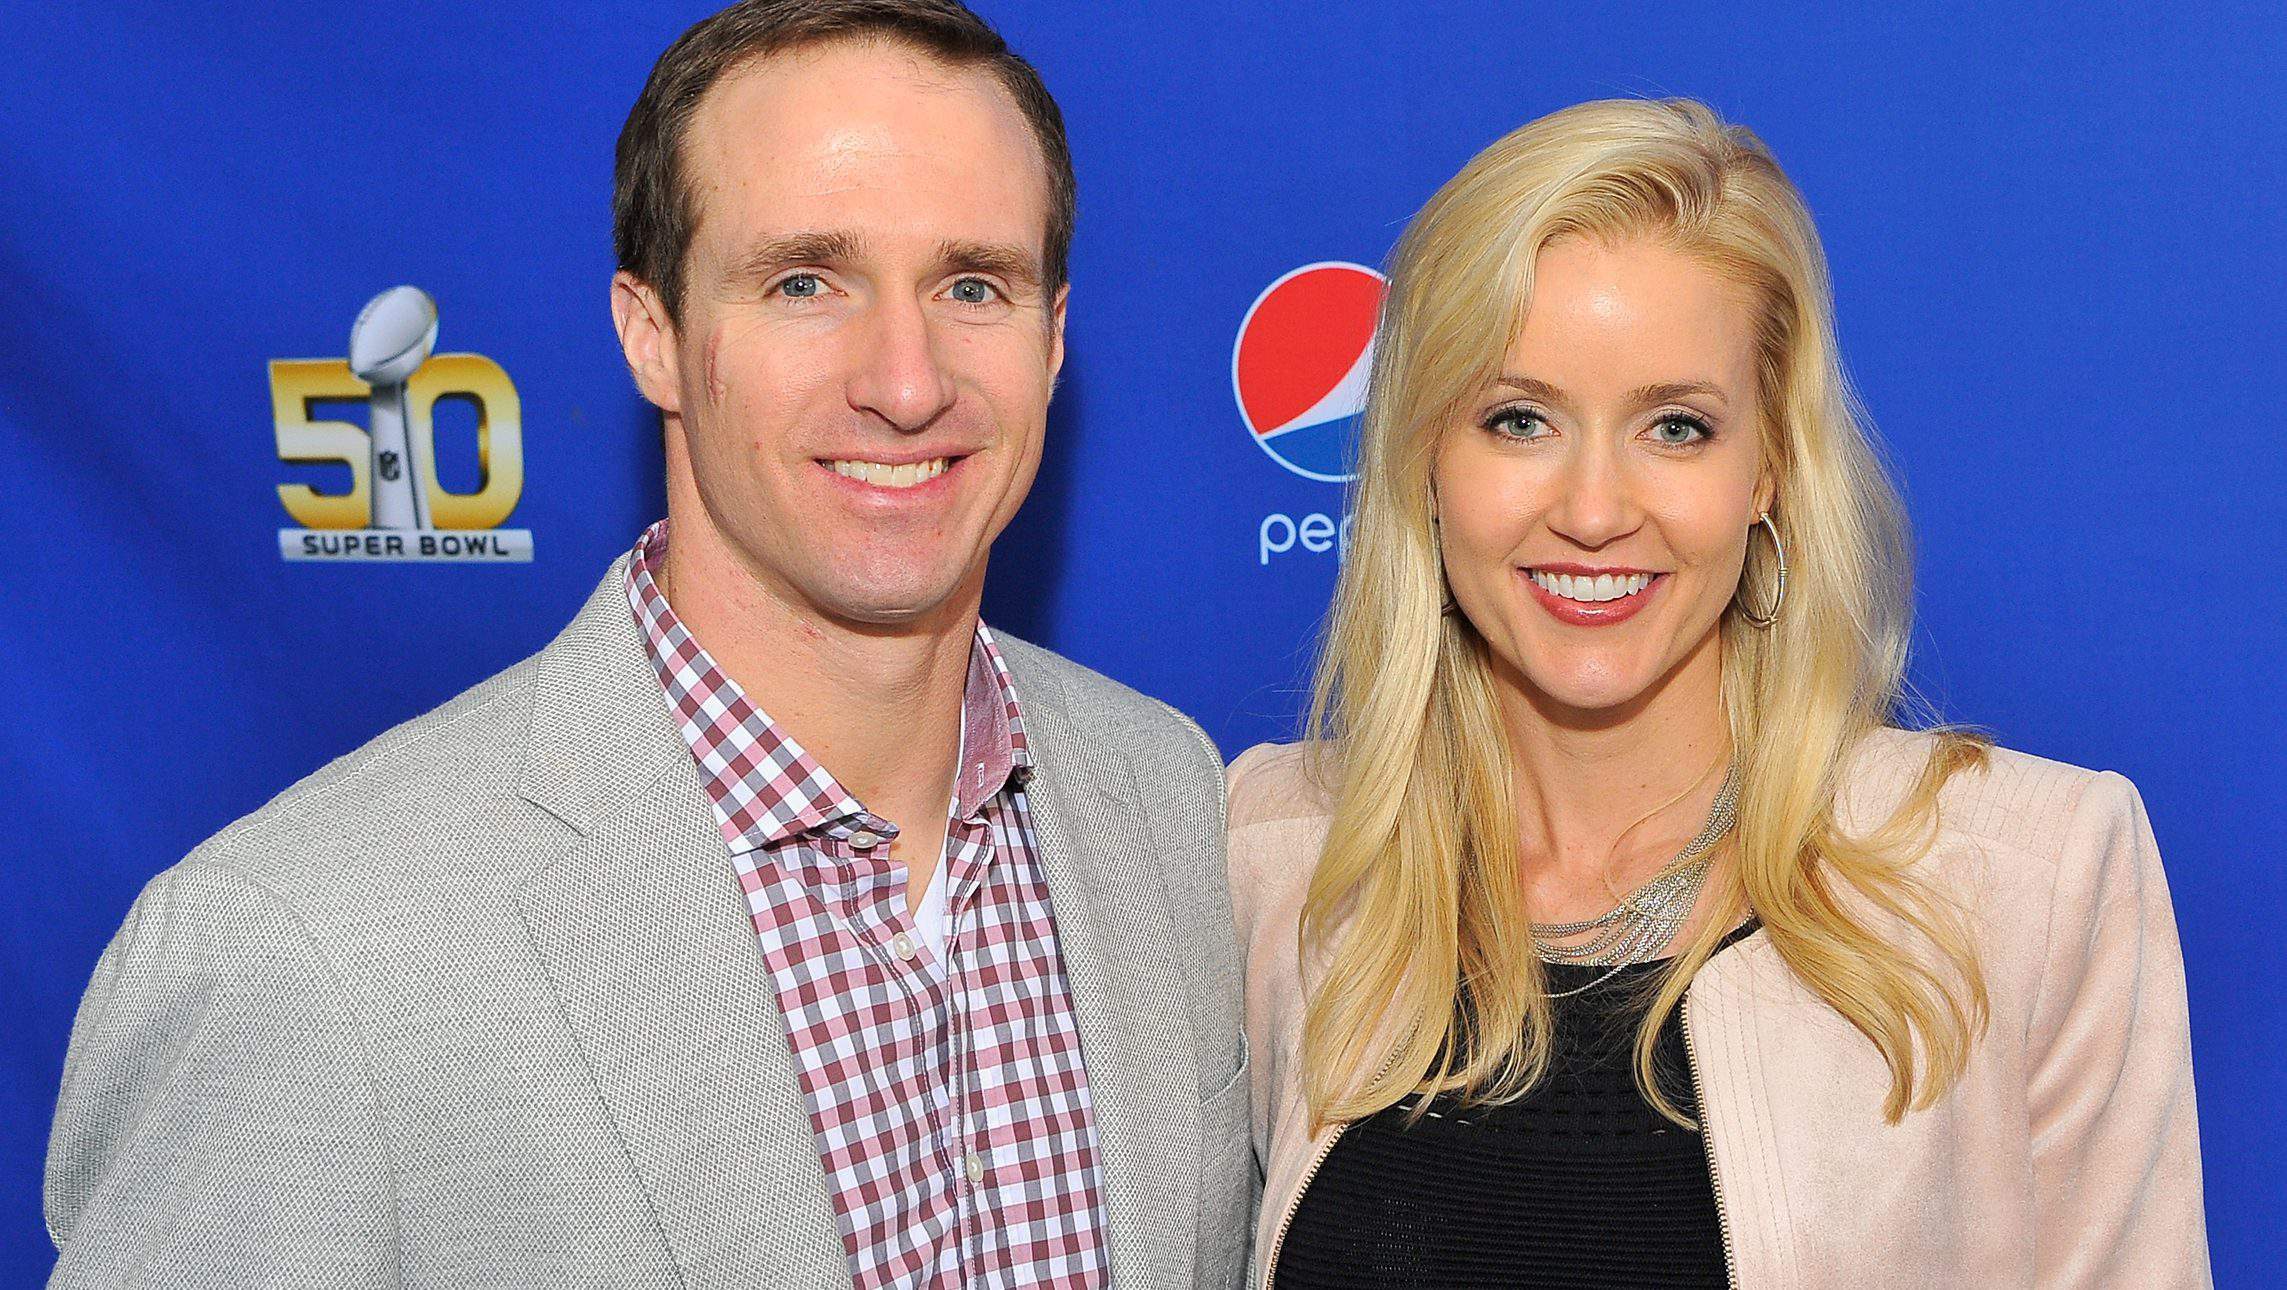 Drew Brees wife, Brittany Brees’ Bio: Age, Net worth, Parents, Hometown